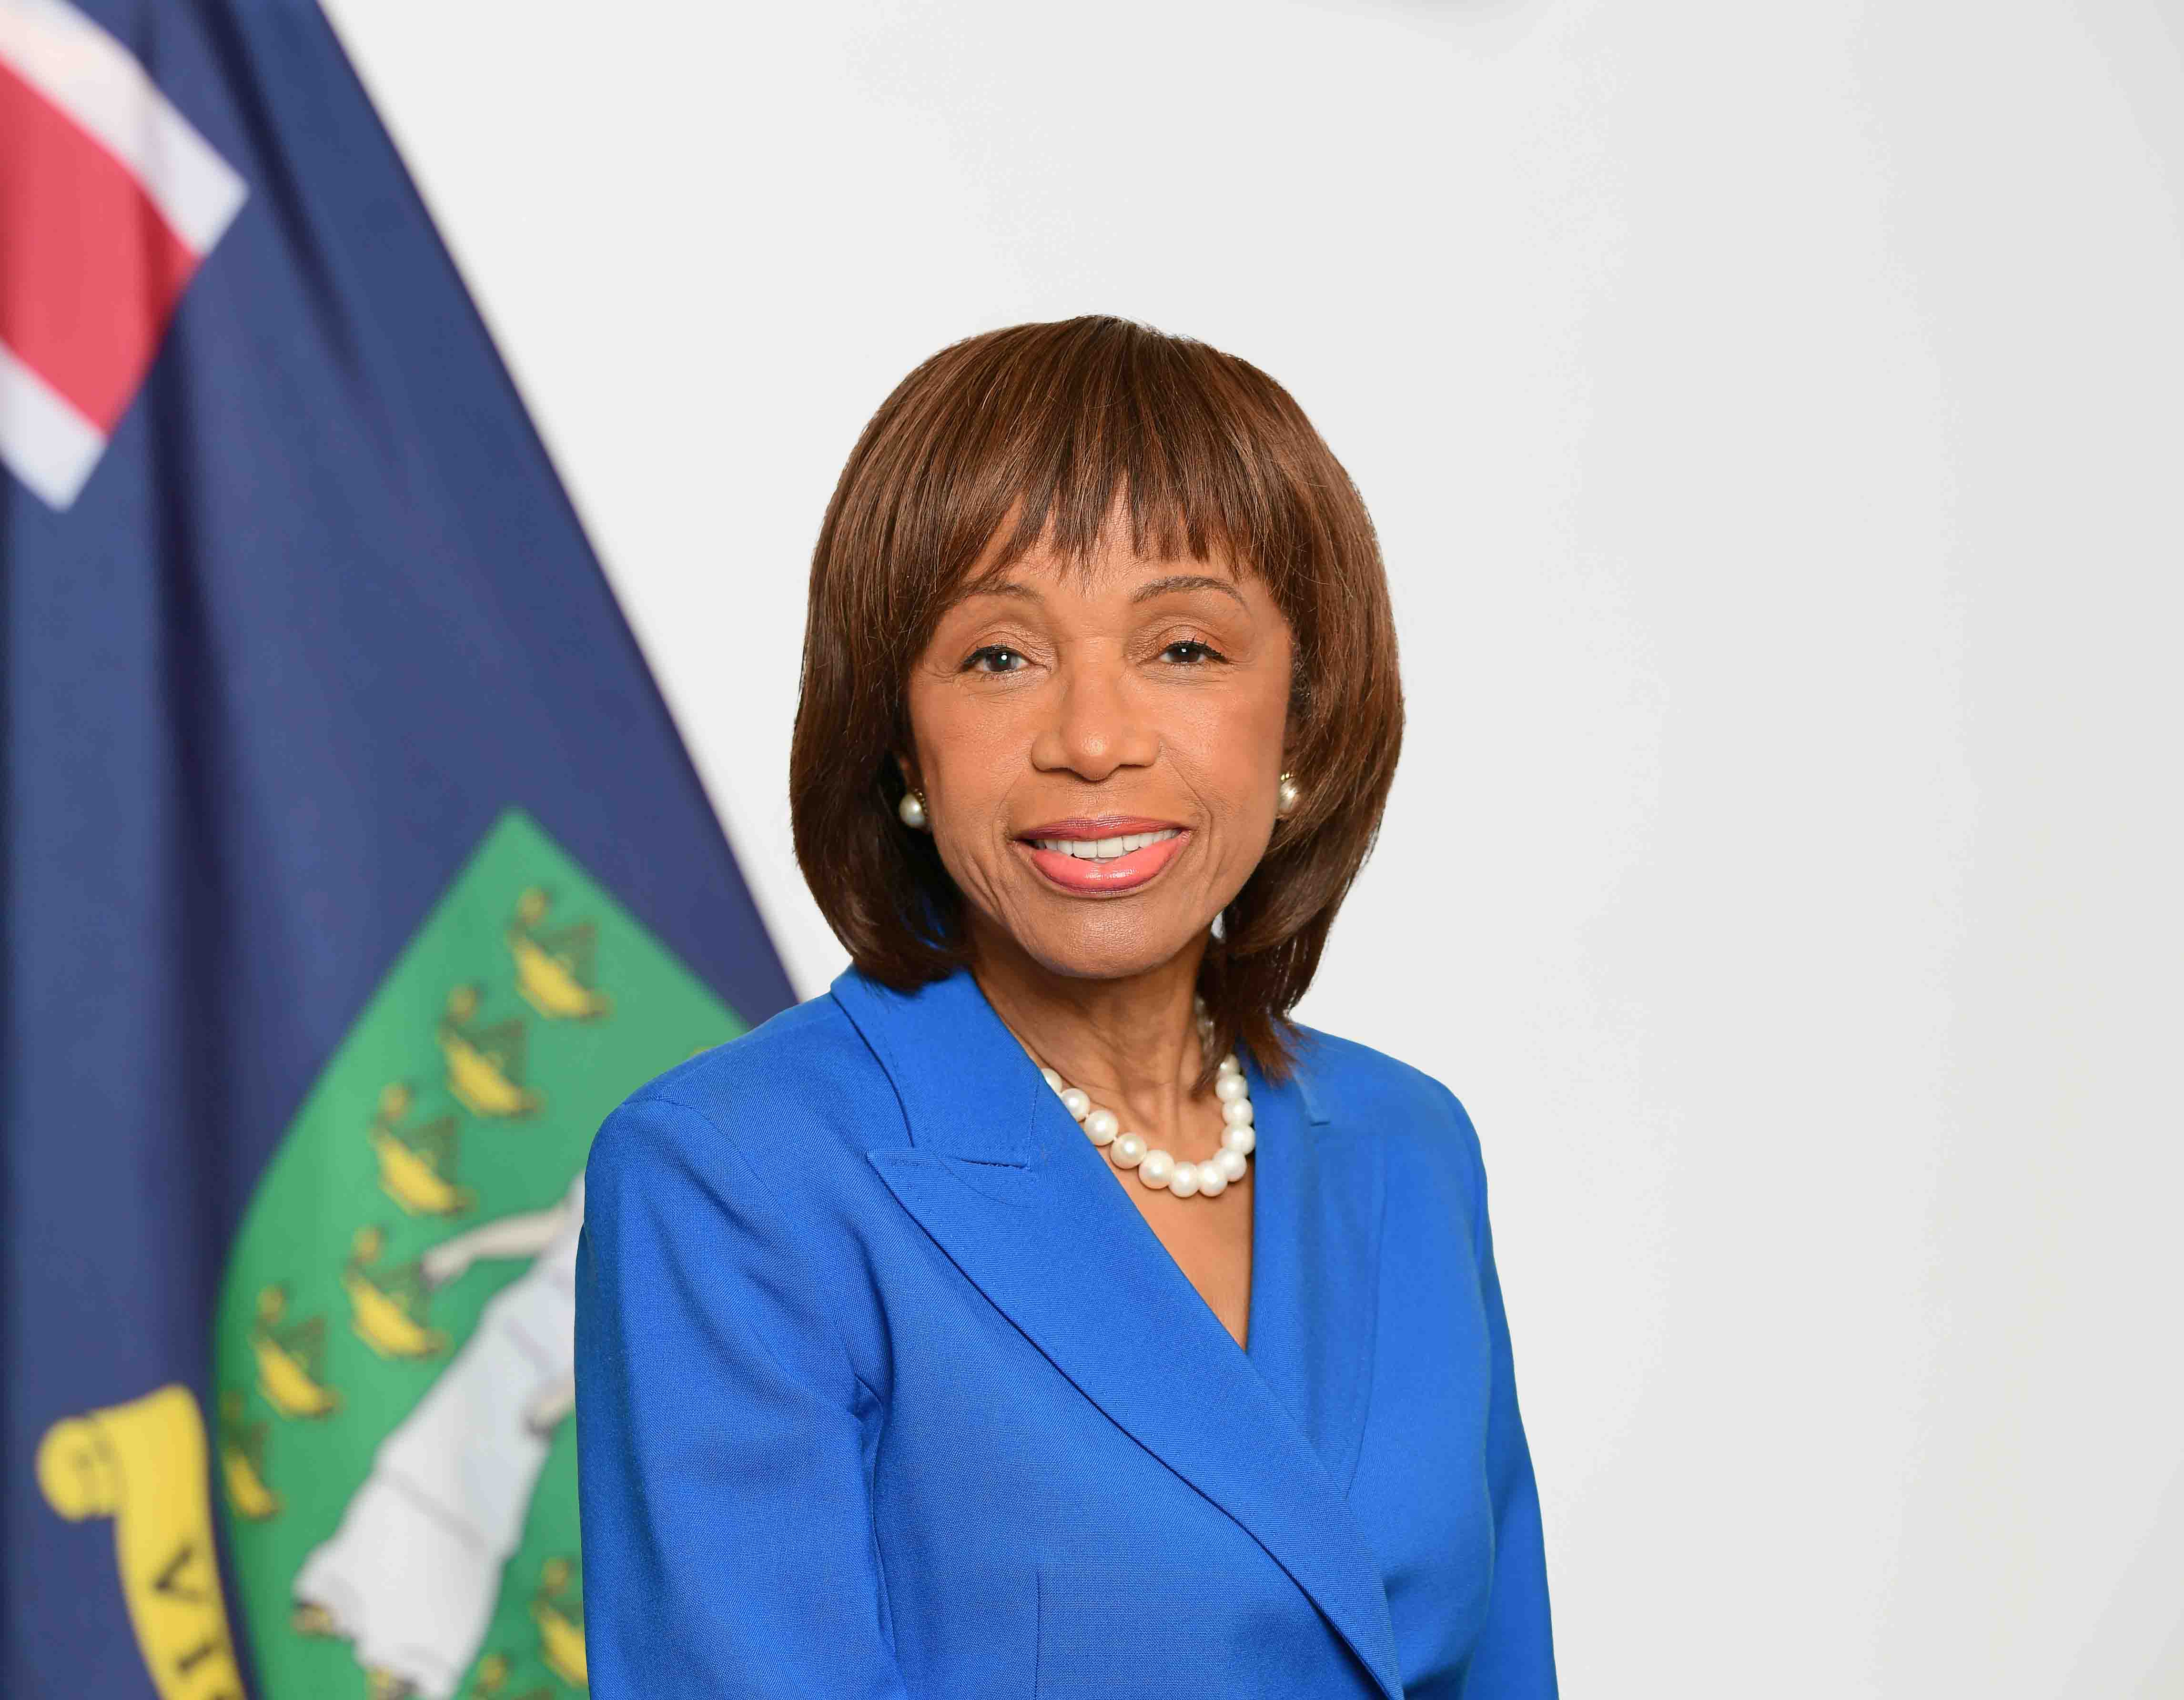 Deputy Premier Whips Out Receipts At Press Conference 